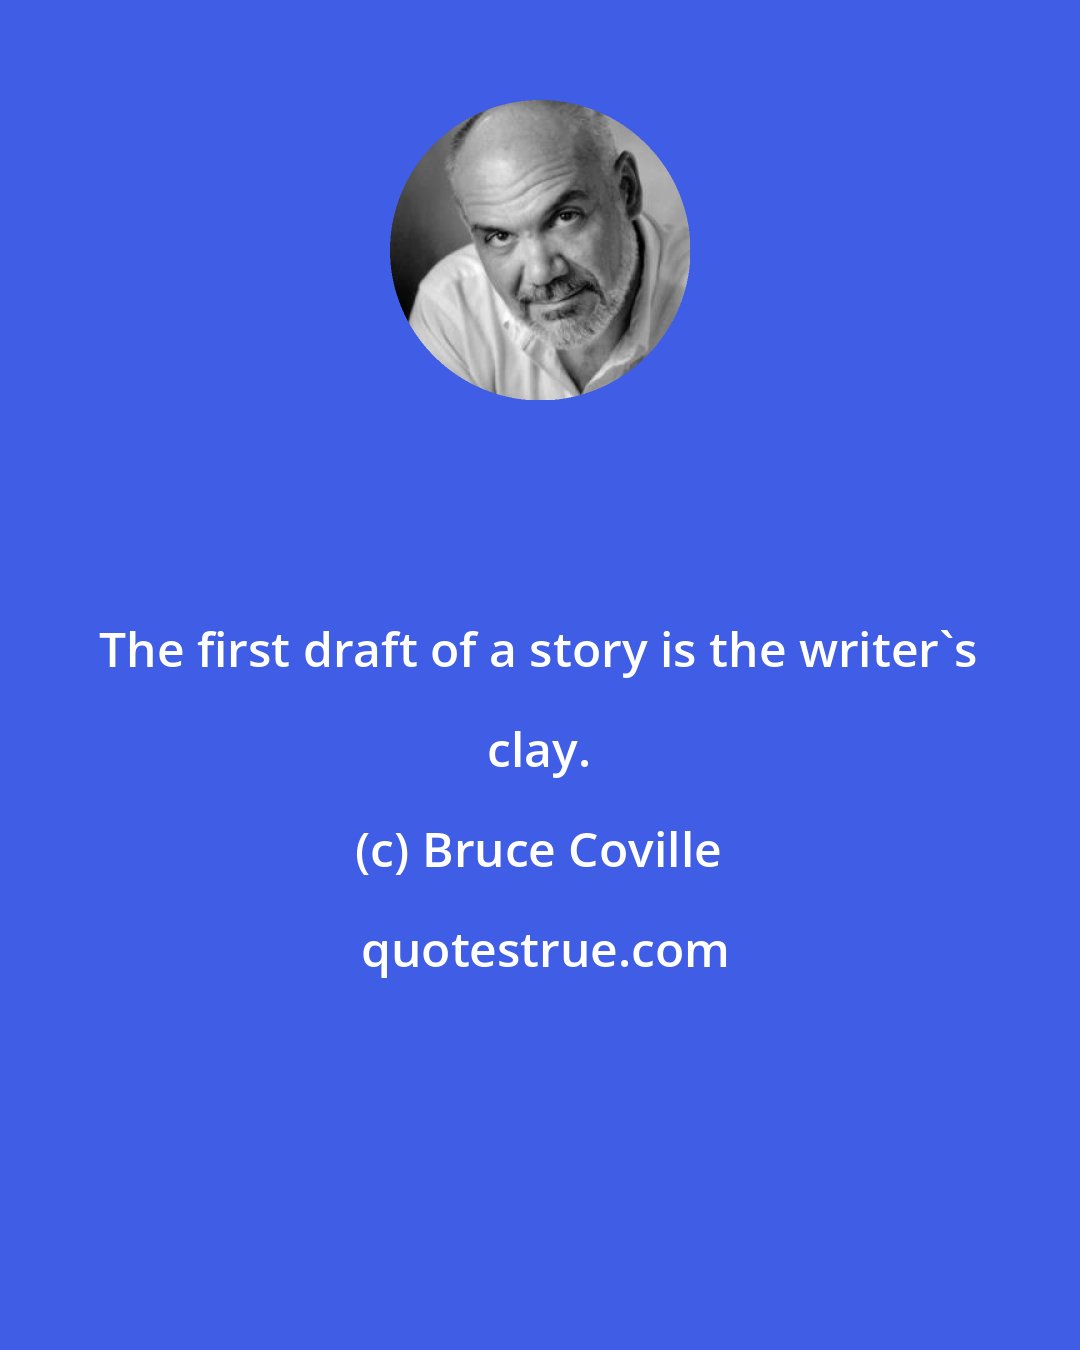 Bruce Coville: The first draft of a story is the writer's clay.